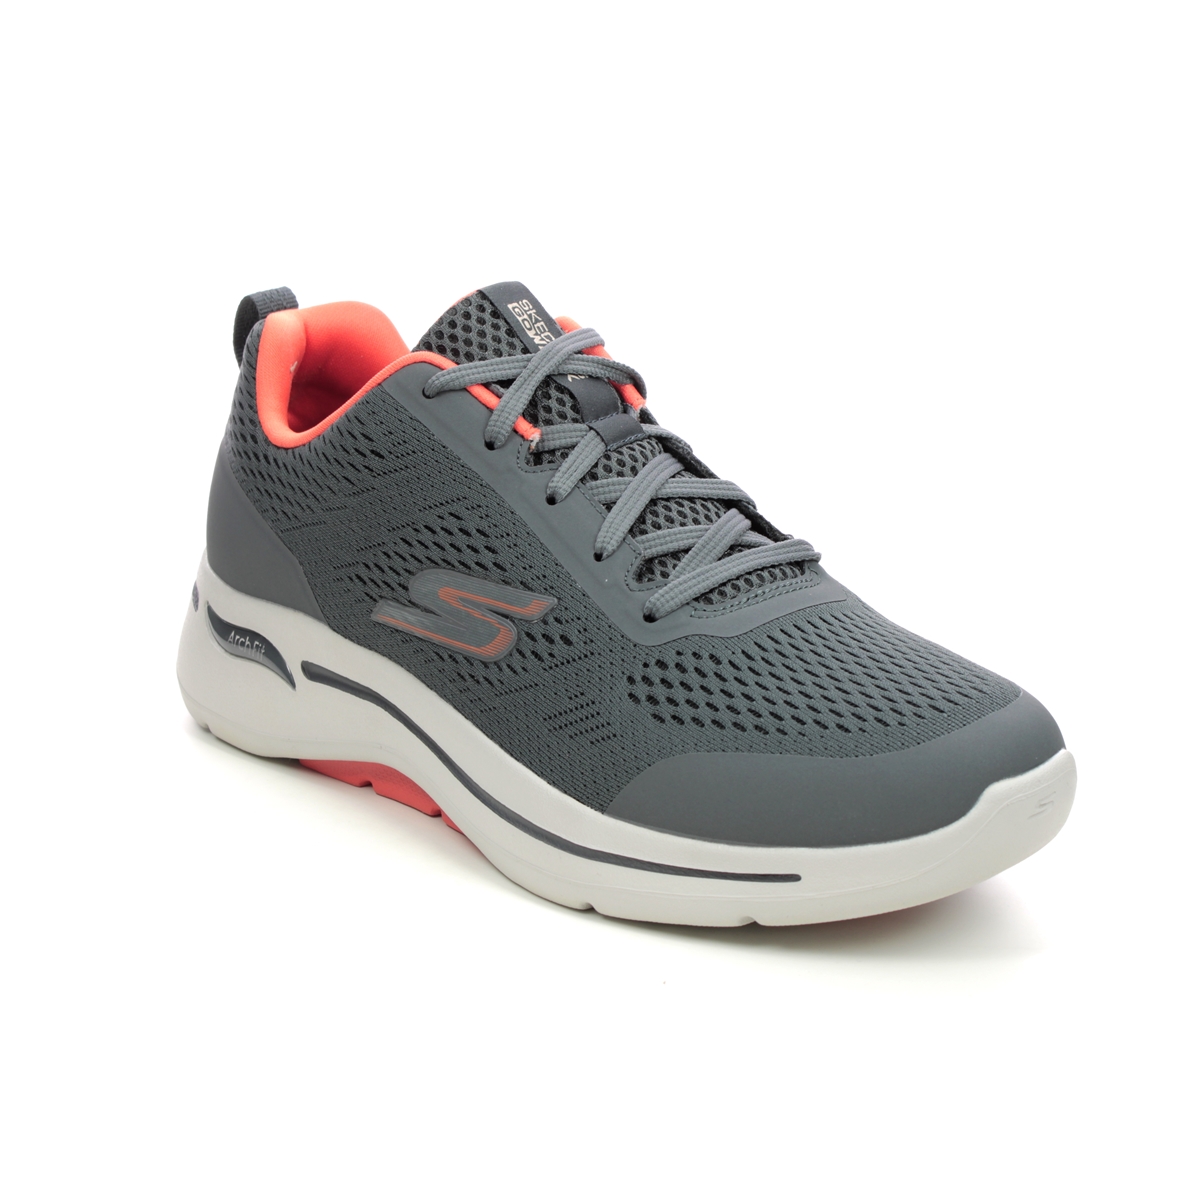 Skechers Arch Fit Go Walk Charcoal Grey Mens Trainers 216116 In Size 10.5 In Plain Charcoal Grey